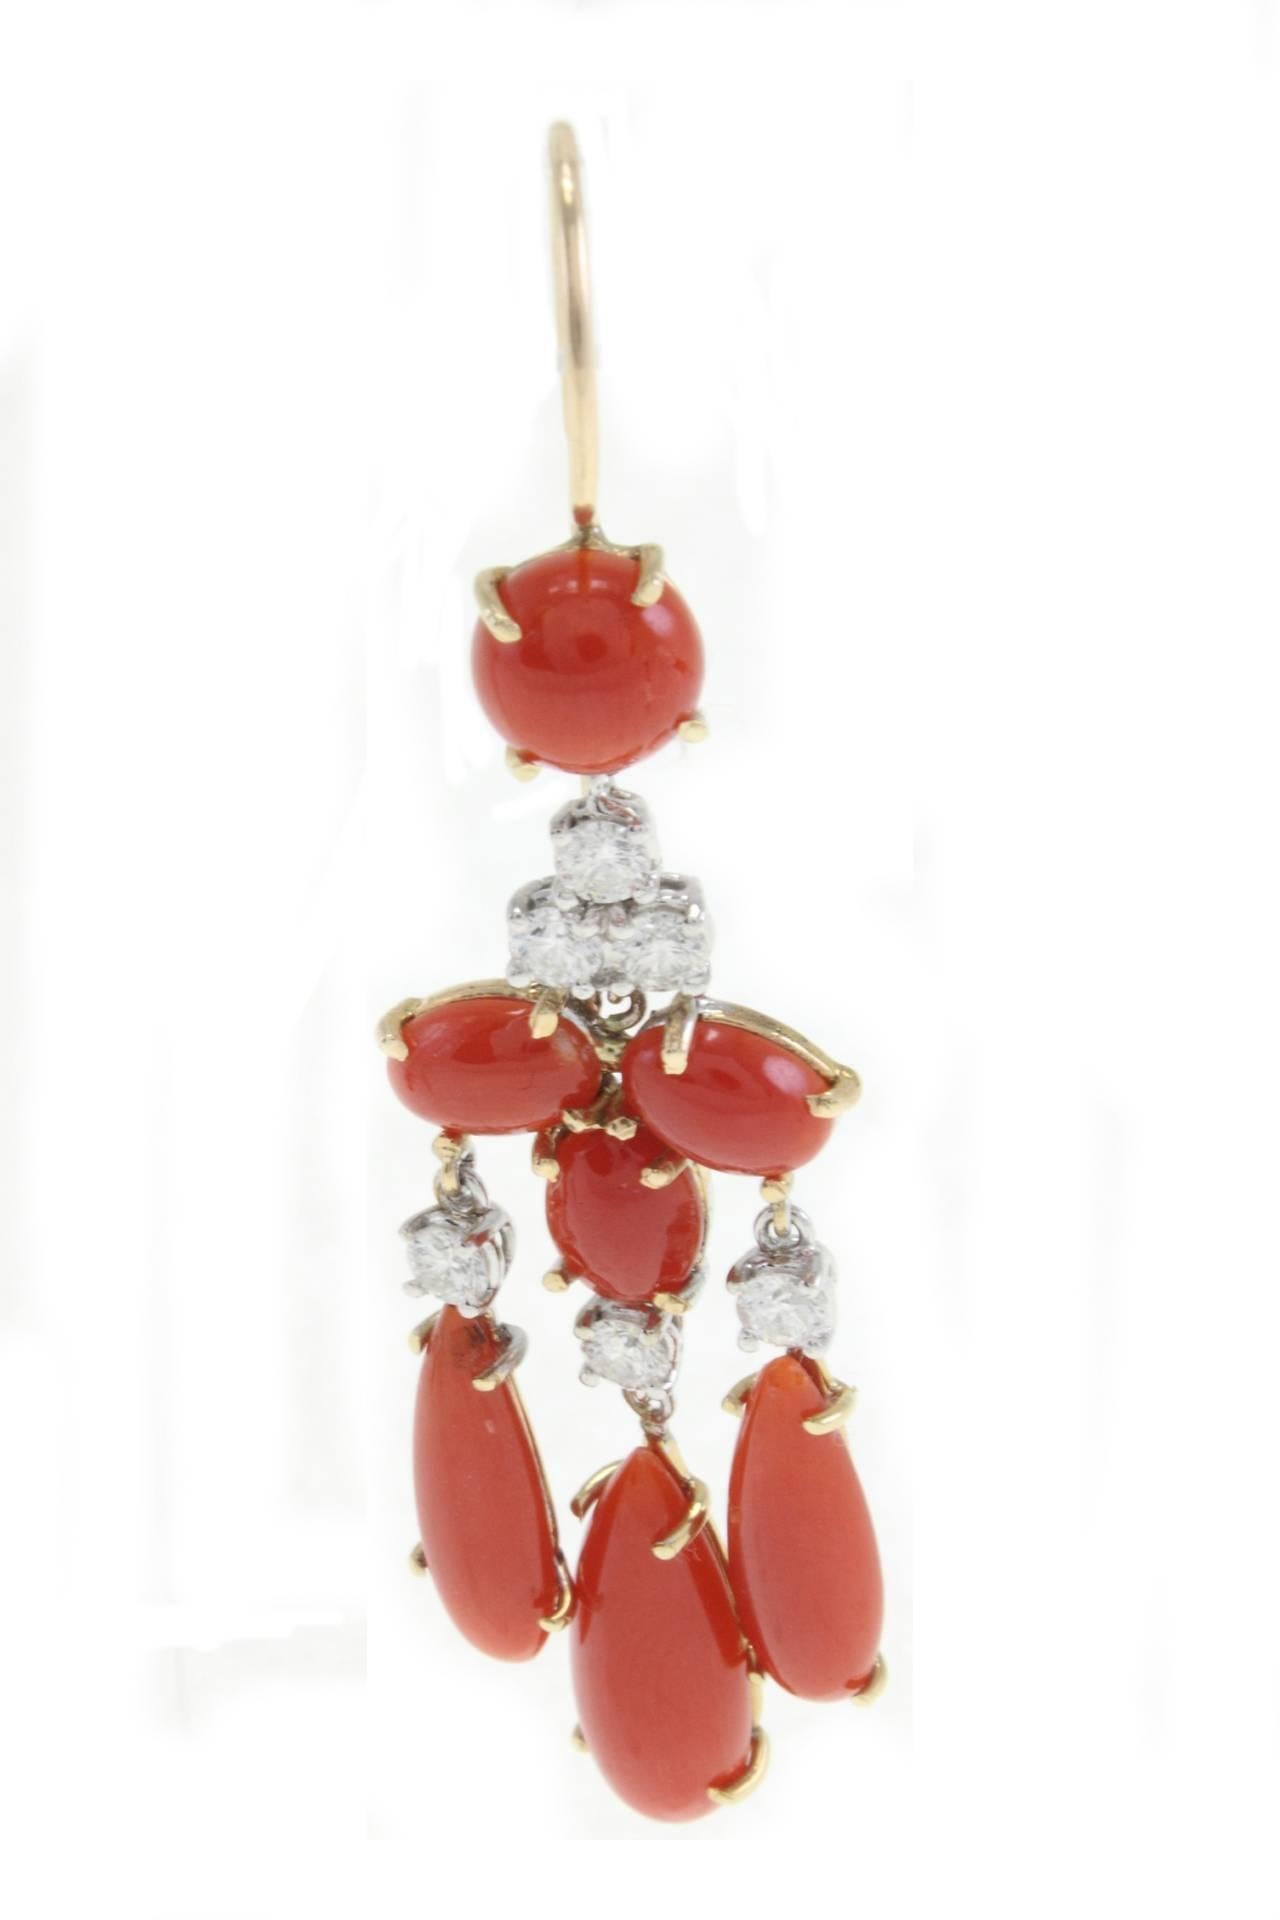 Sparkling earrings in 14Kt of white gold composed of diamonds and coral drops.

coral( 4.20gr)
diamonds(1.23Kt). 
US Size
Width 1.59 inch
Lenght 2.16 inch
total weight 6.55gr
Rf. 152351